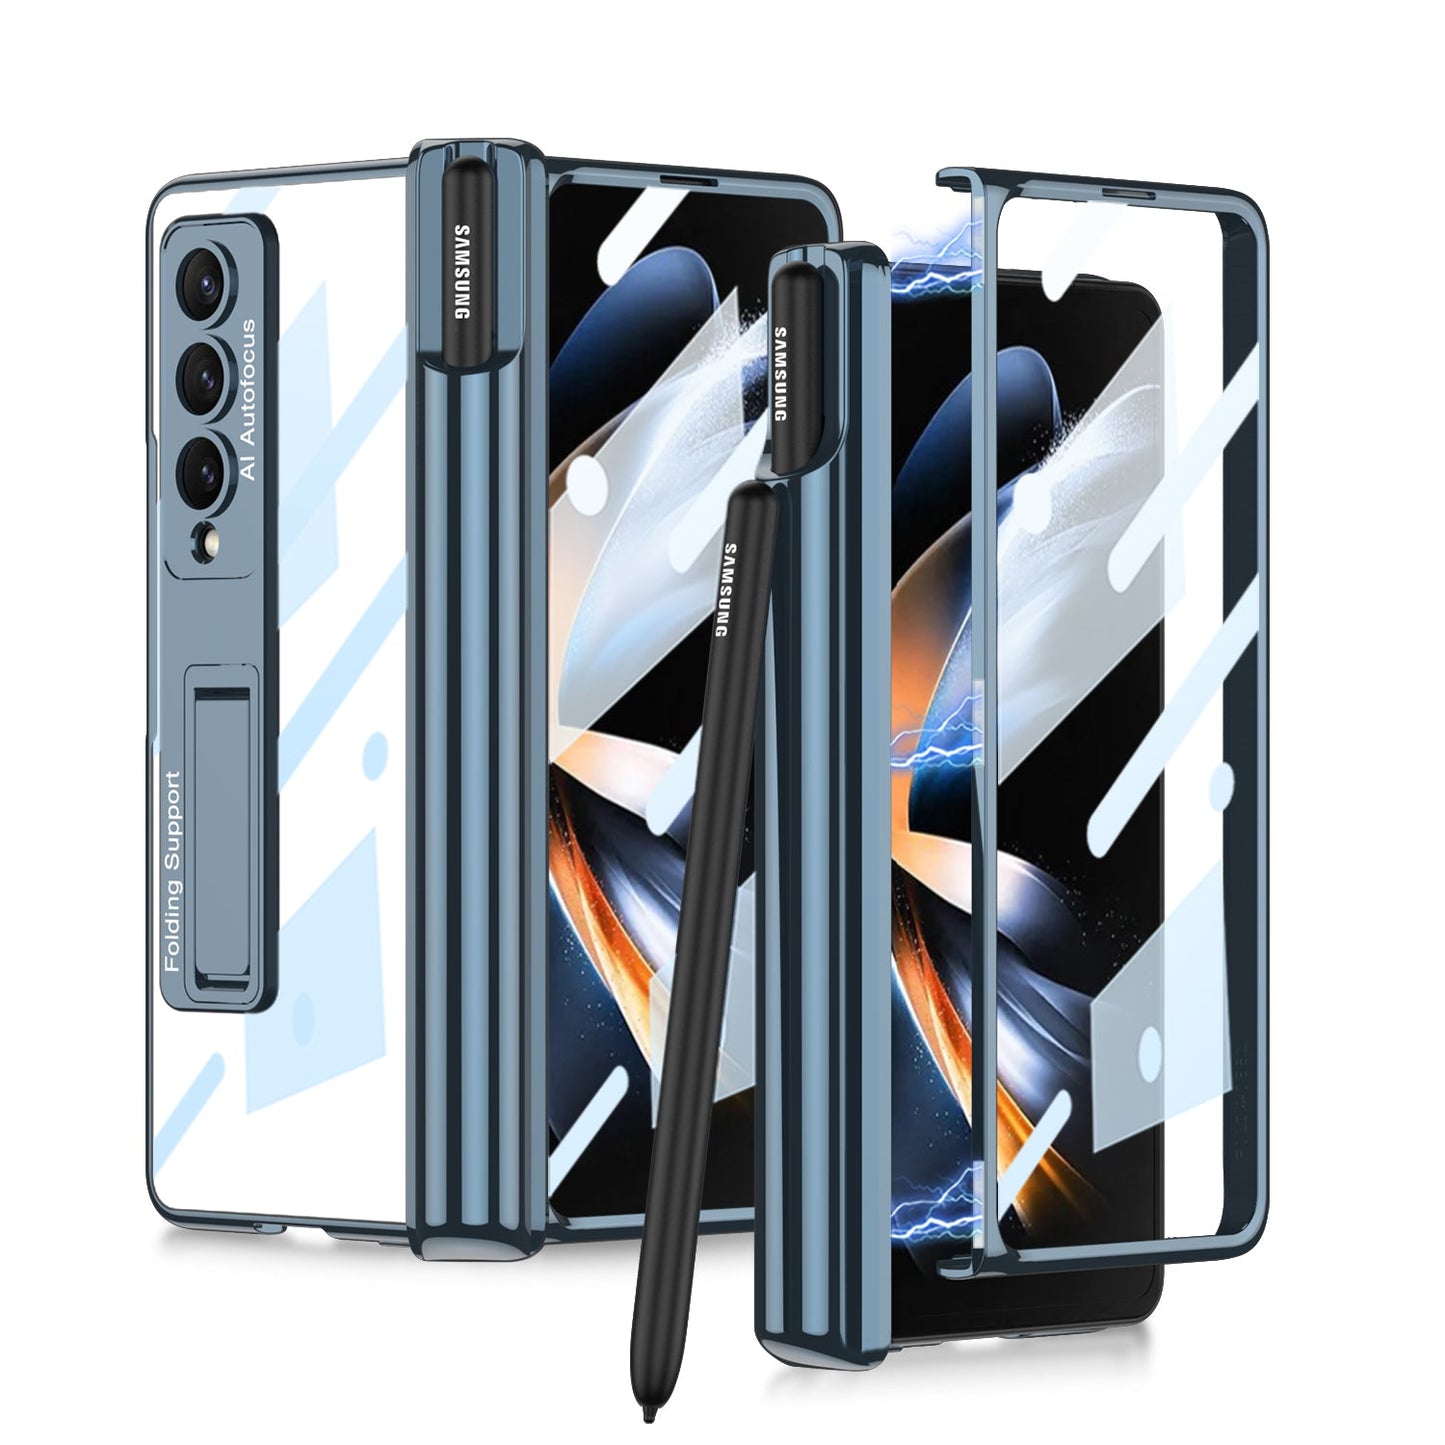 Magnetic S Pen Slot Holder Screen Protector Case for Samsung Galaxy Z Fold4